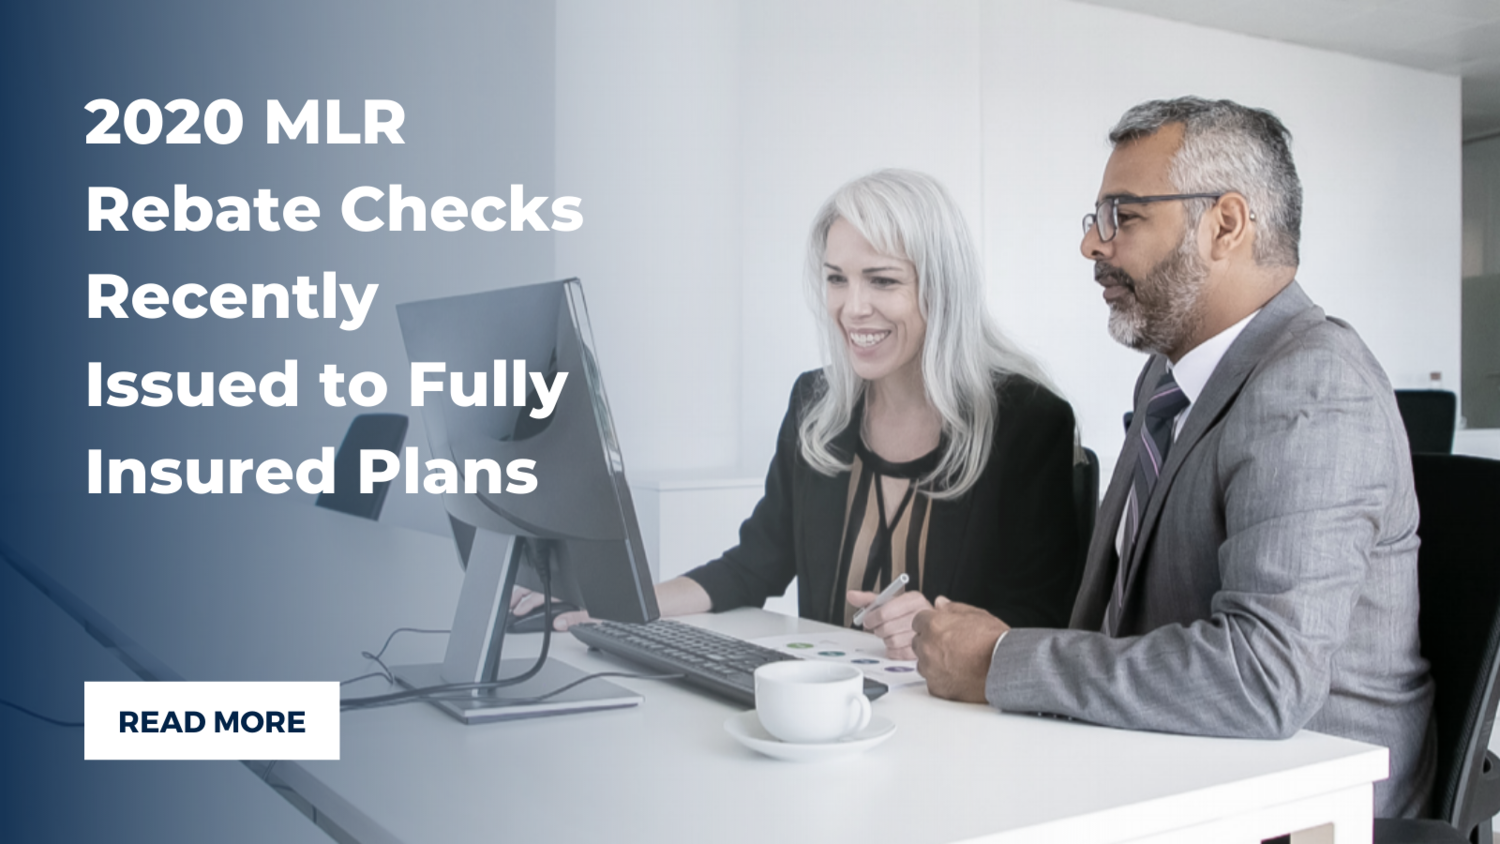 2020-mlr-rebate-checks-recently-issued-to-fully-insured-plans